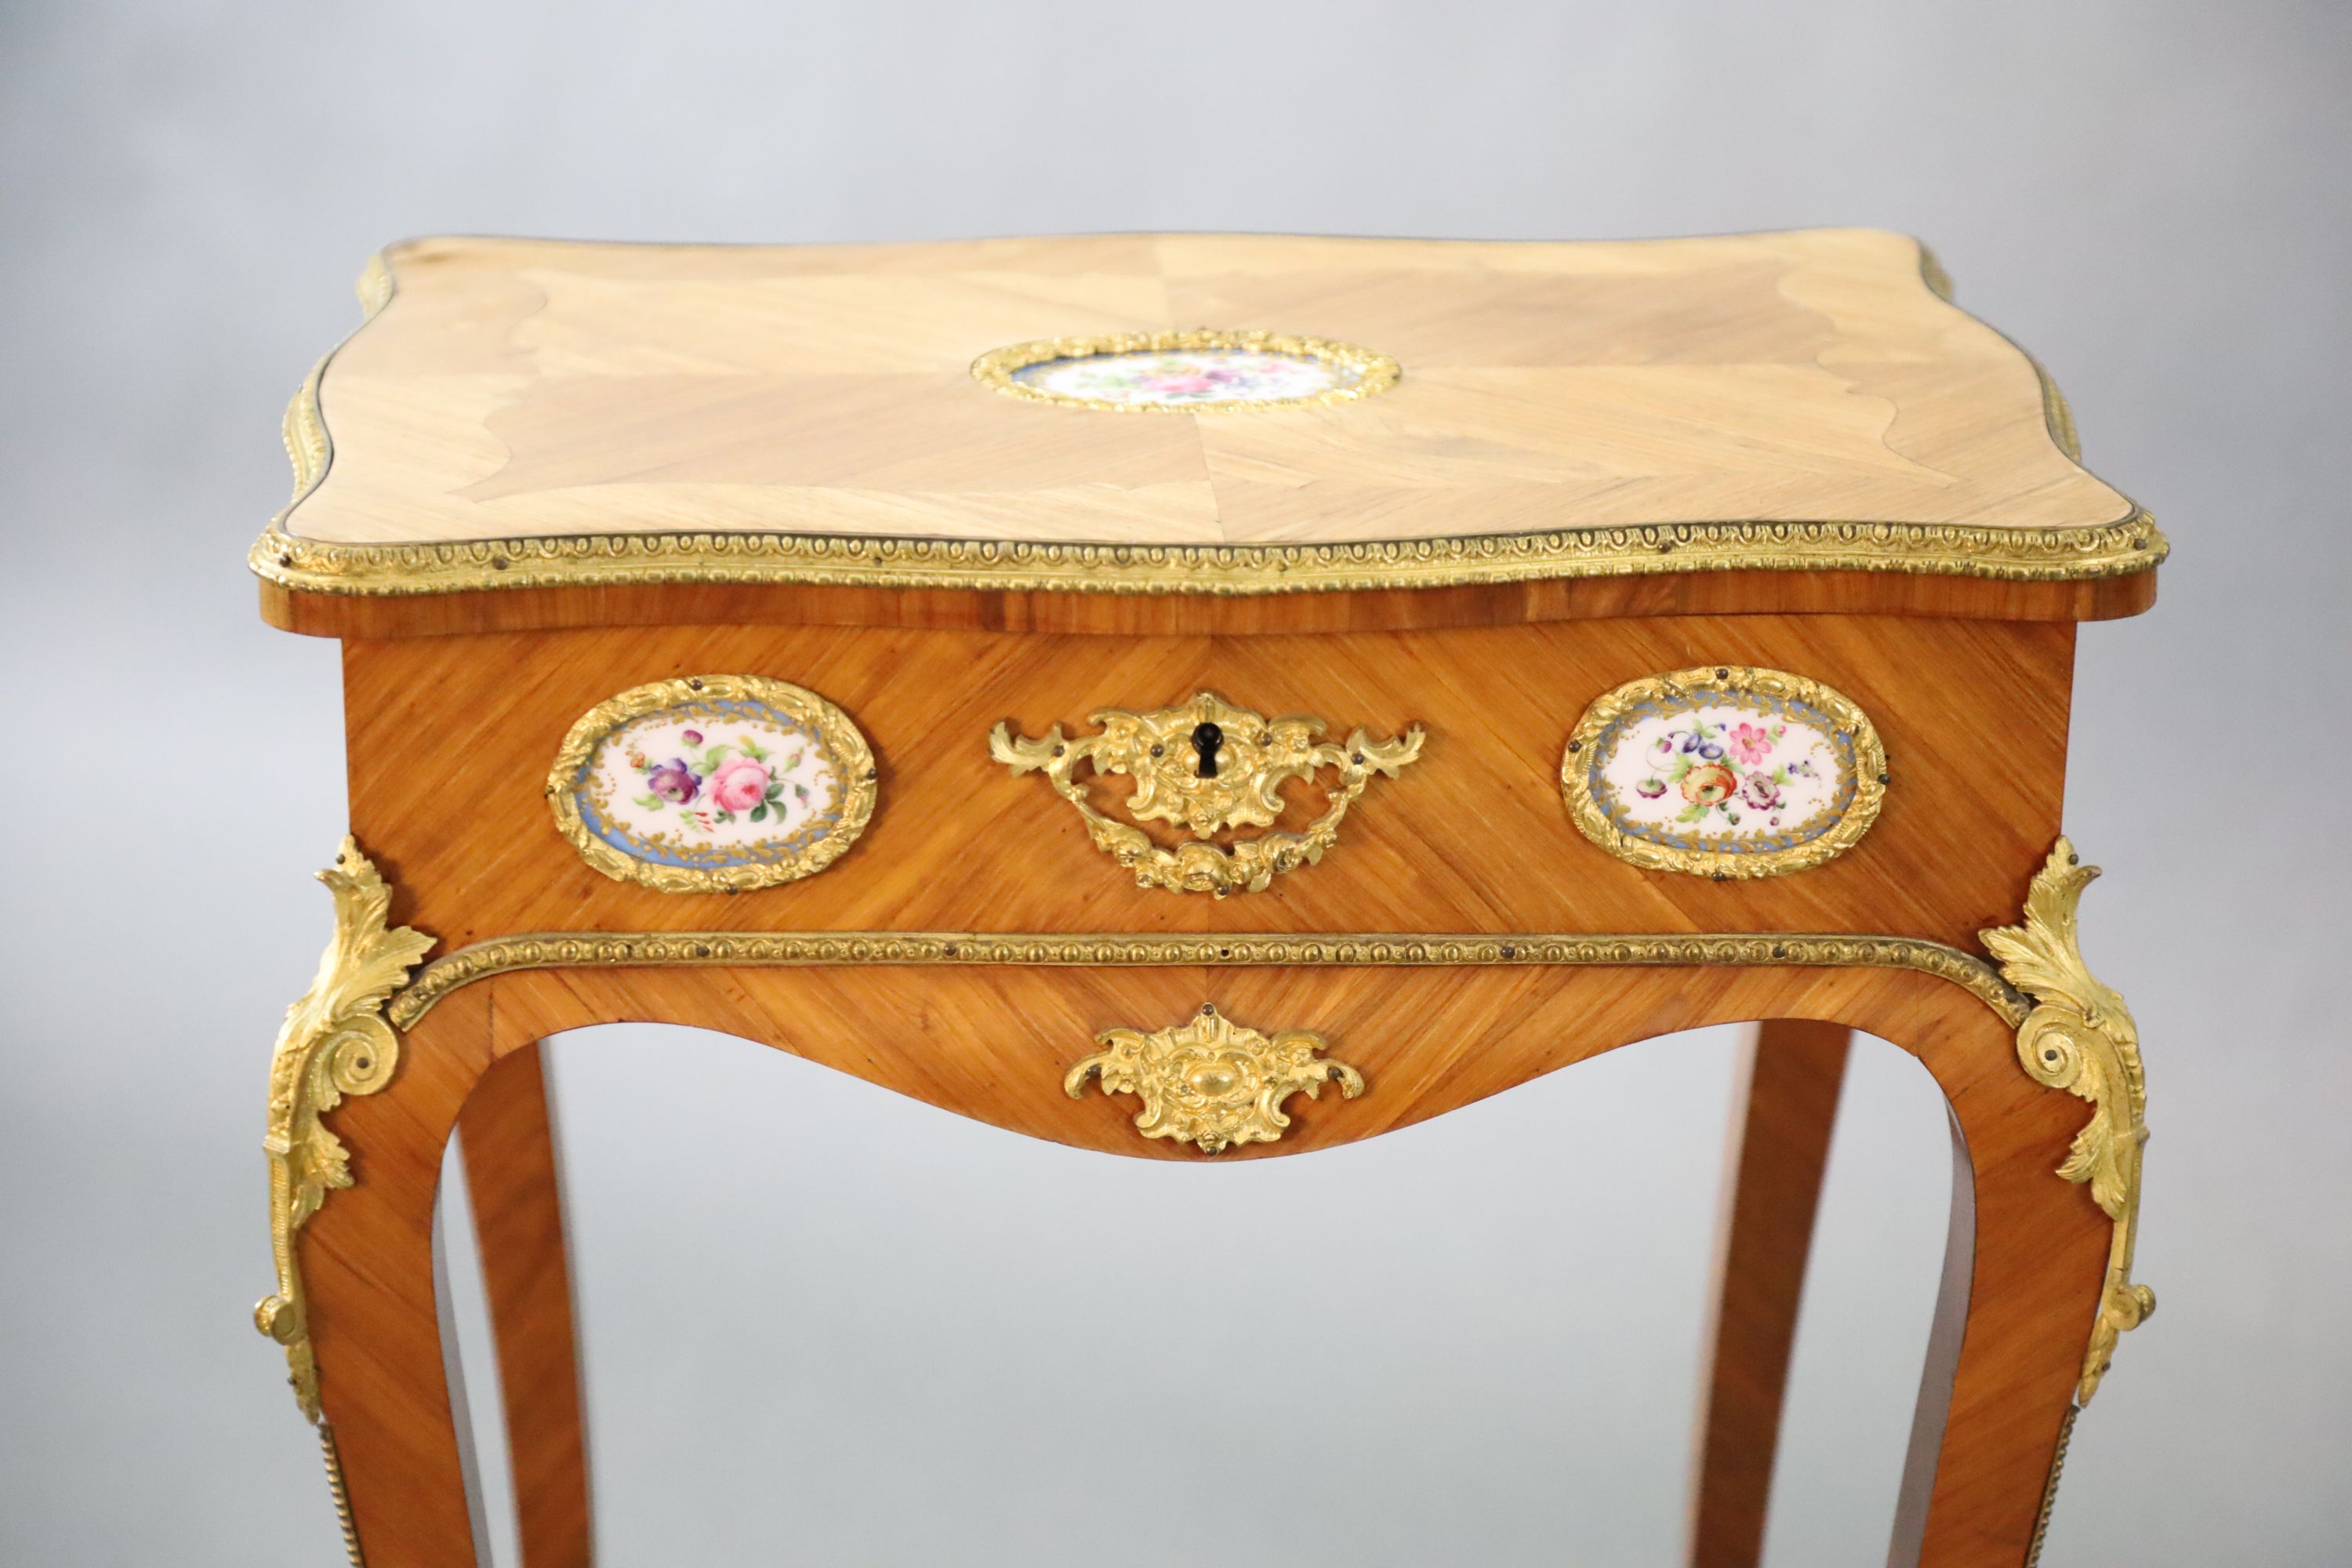 A late 19th century French Louis XV style ormolu kingwood work table, W.1ft 8in. D.1ft 2.5in. H.2ft 3in.